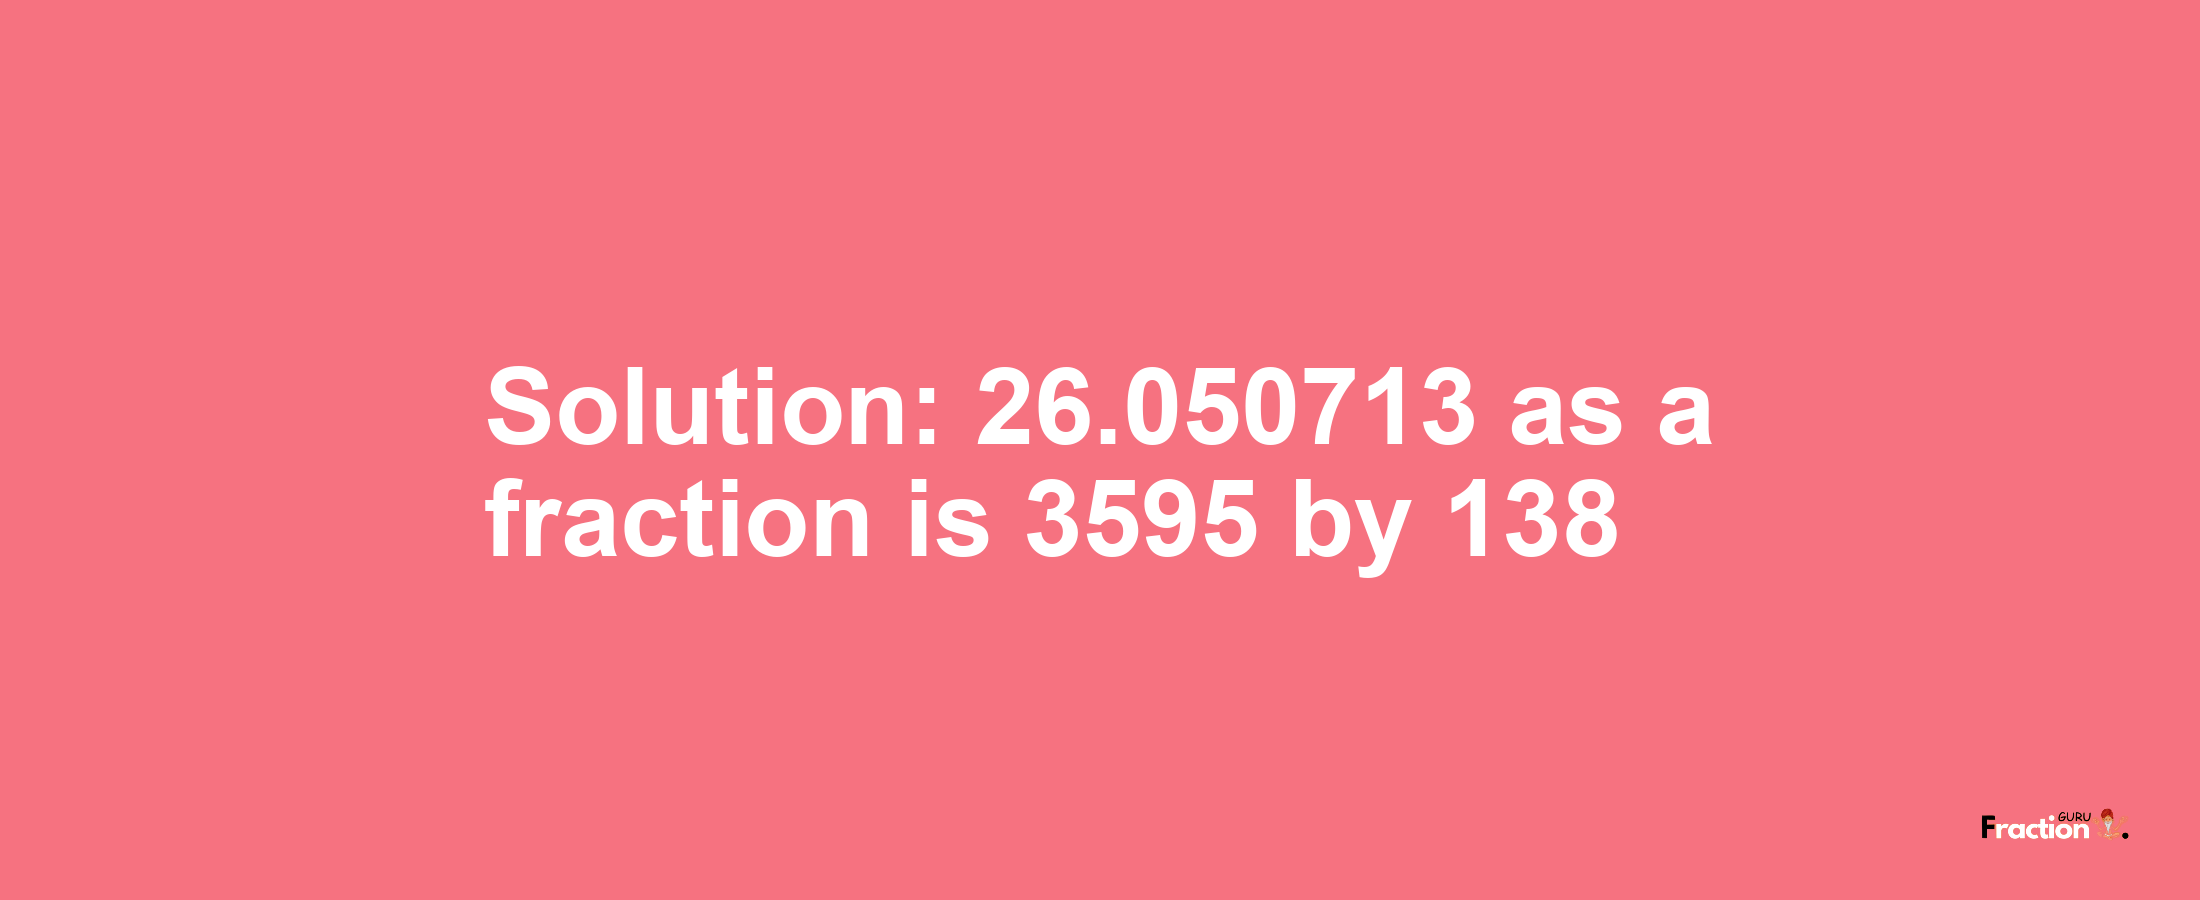 Solution:26.050713 as a fraction is 3595/138